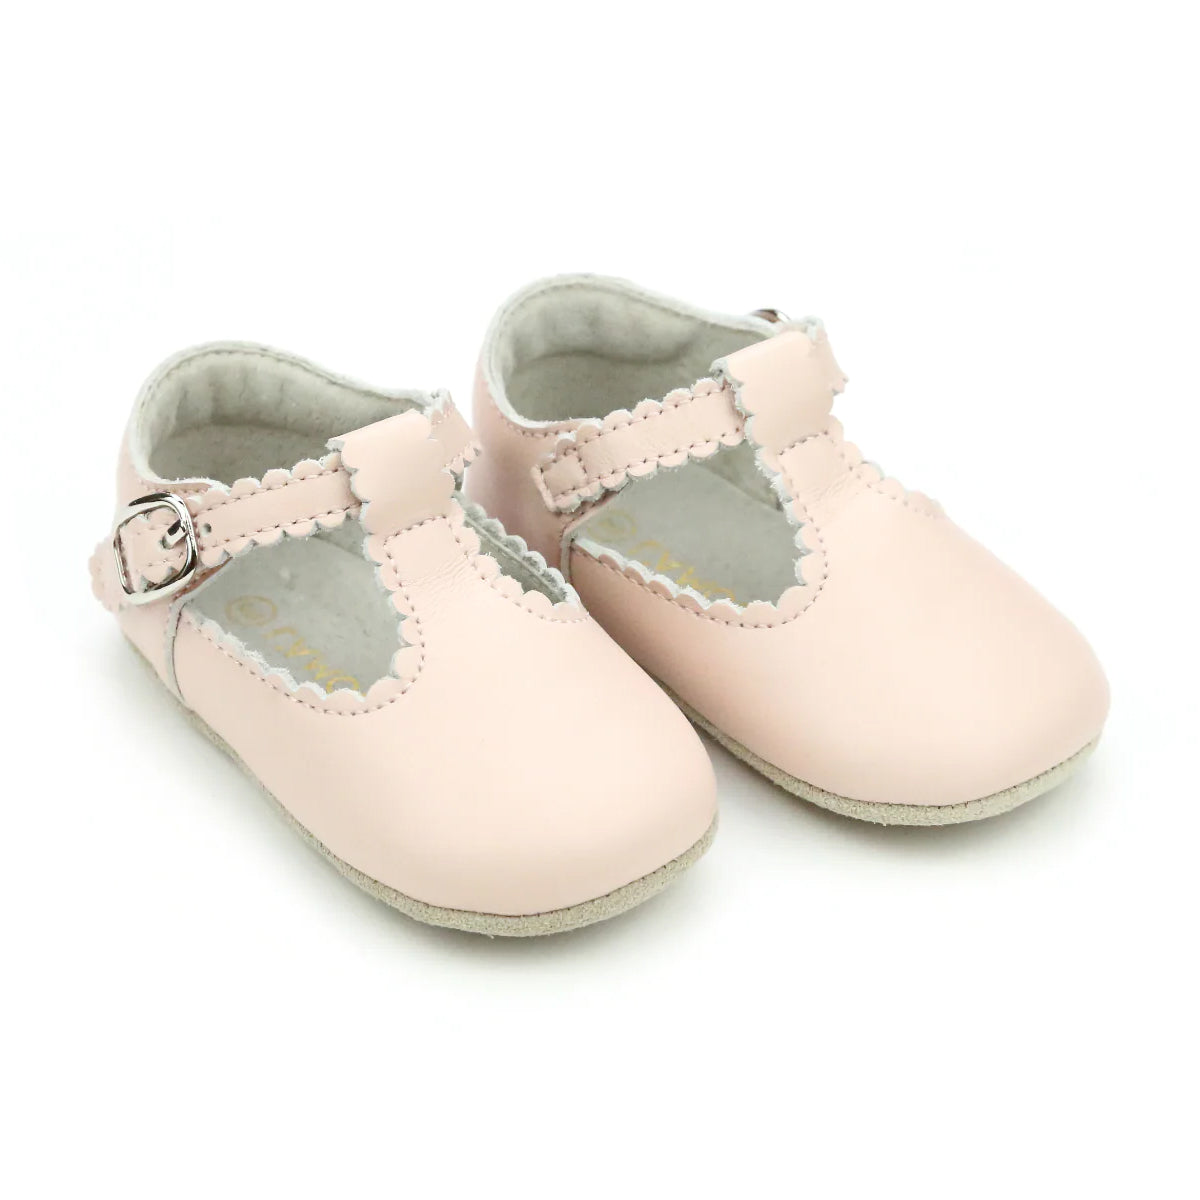 L'Amour Light Pink Elodie Baby Girl's Mary Jane Crib Shoes